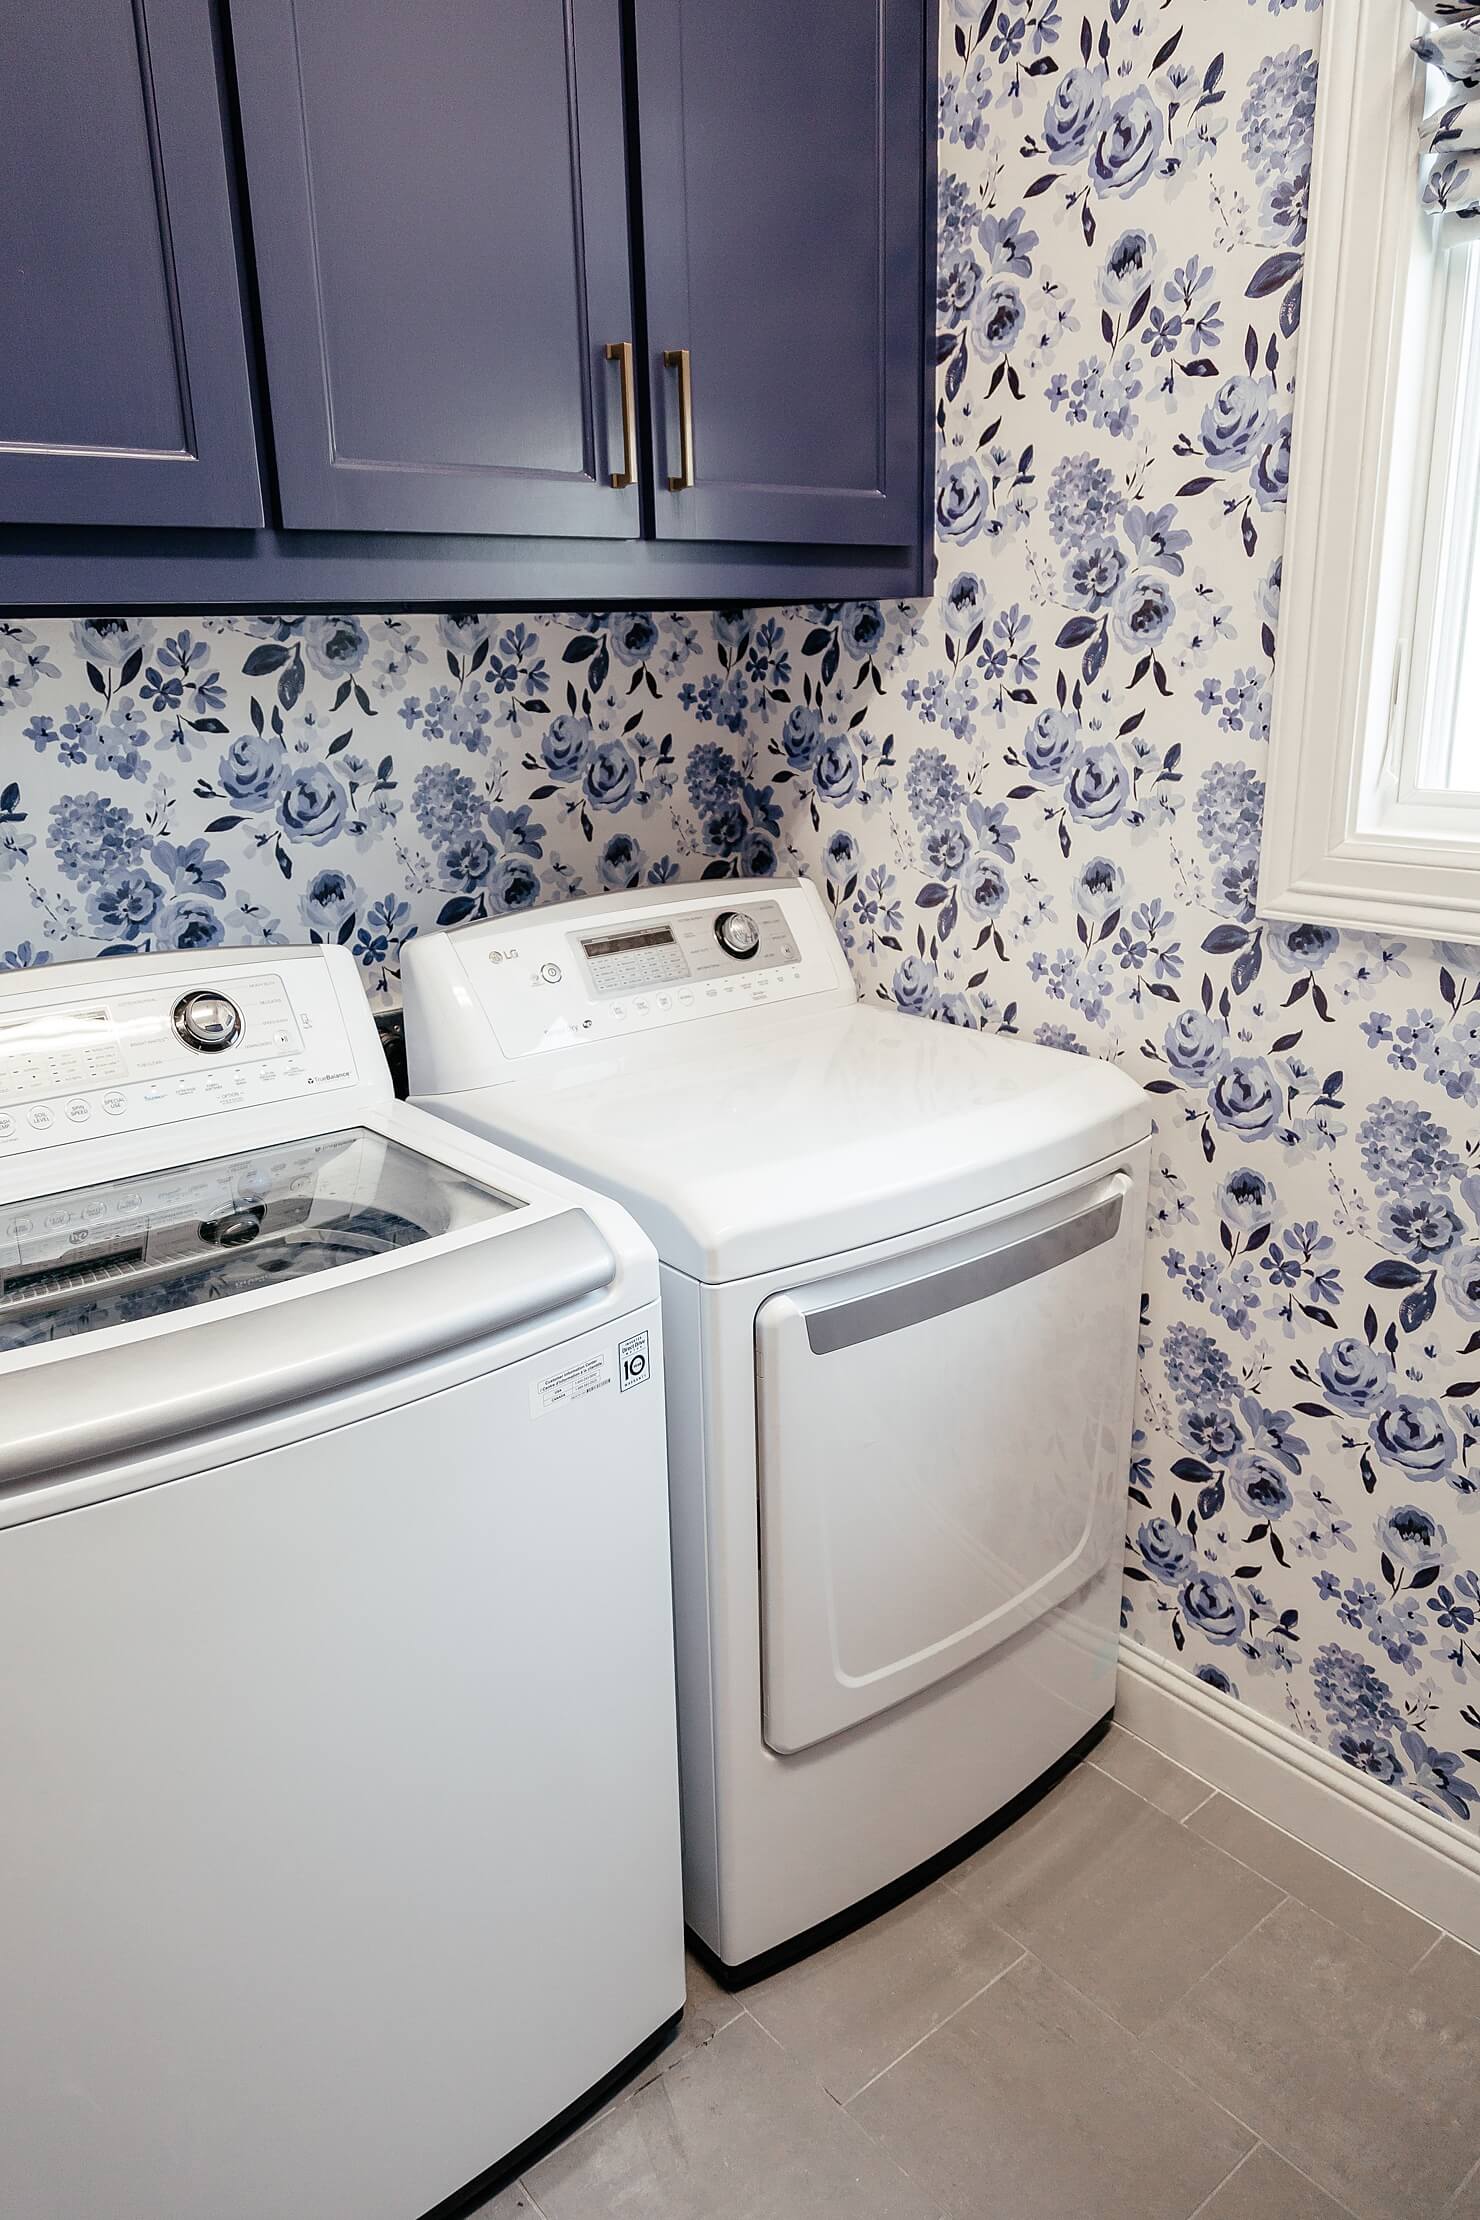 brighton keller laundry room blue and white print wall paper navy blue painted cabinets cute laundry room